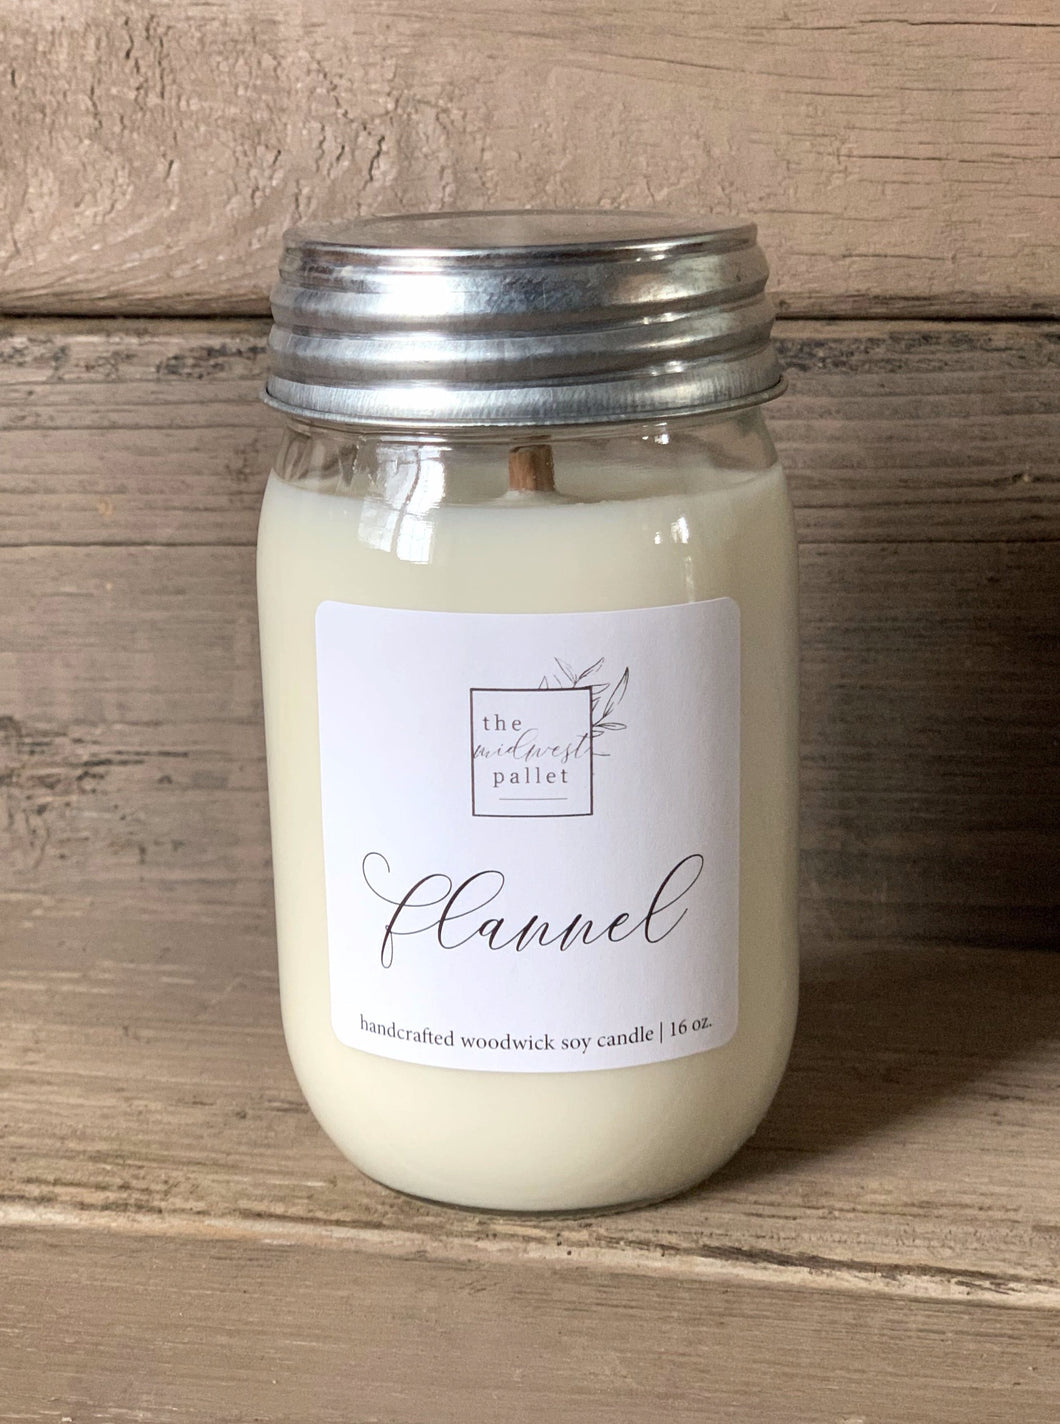 Flannel | Soy Wooden Wick Candle